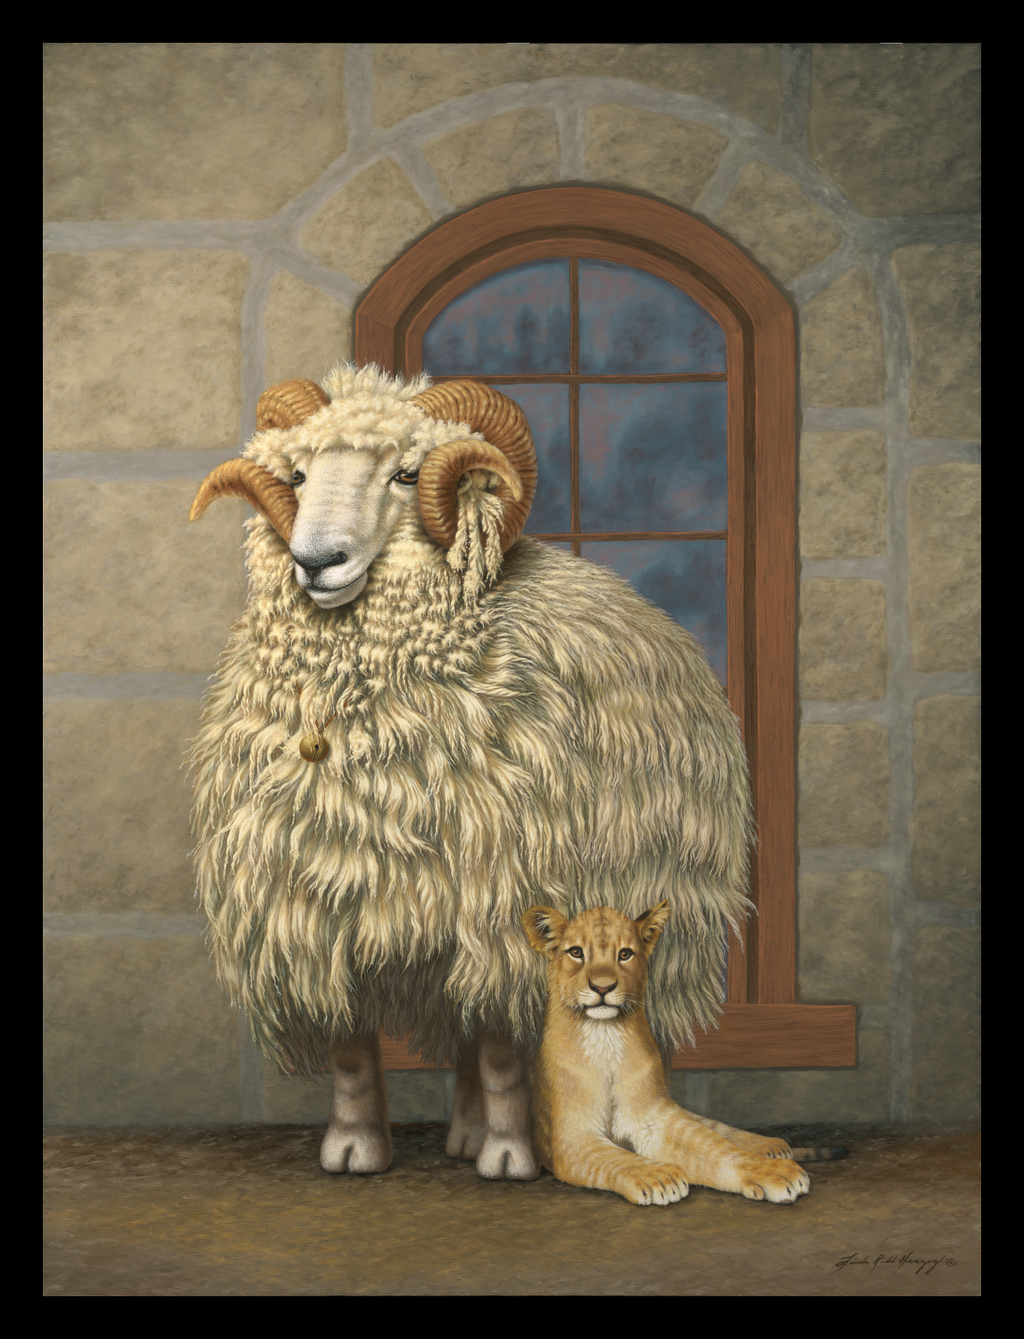 the_sheep_and_the_cub_by_lindarherzog-d7epvyh.png